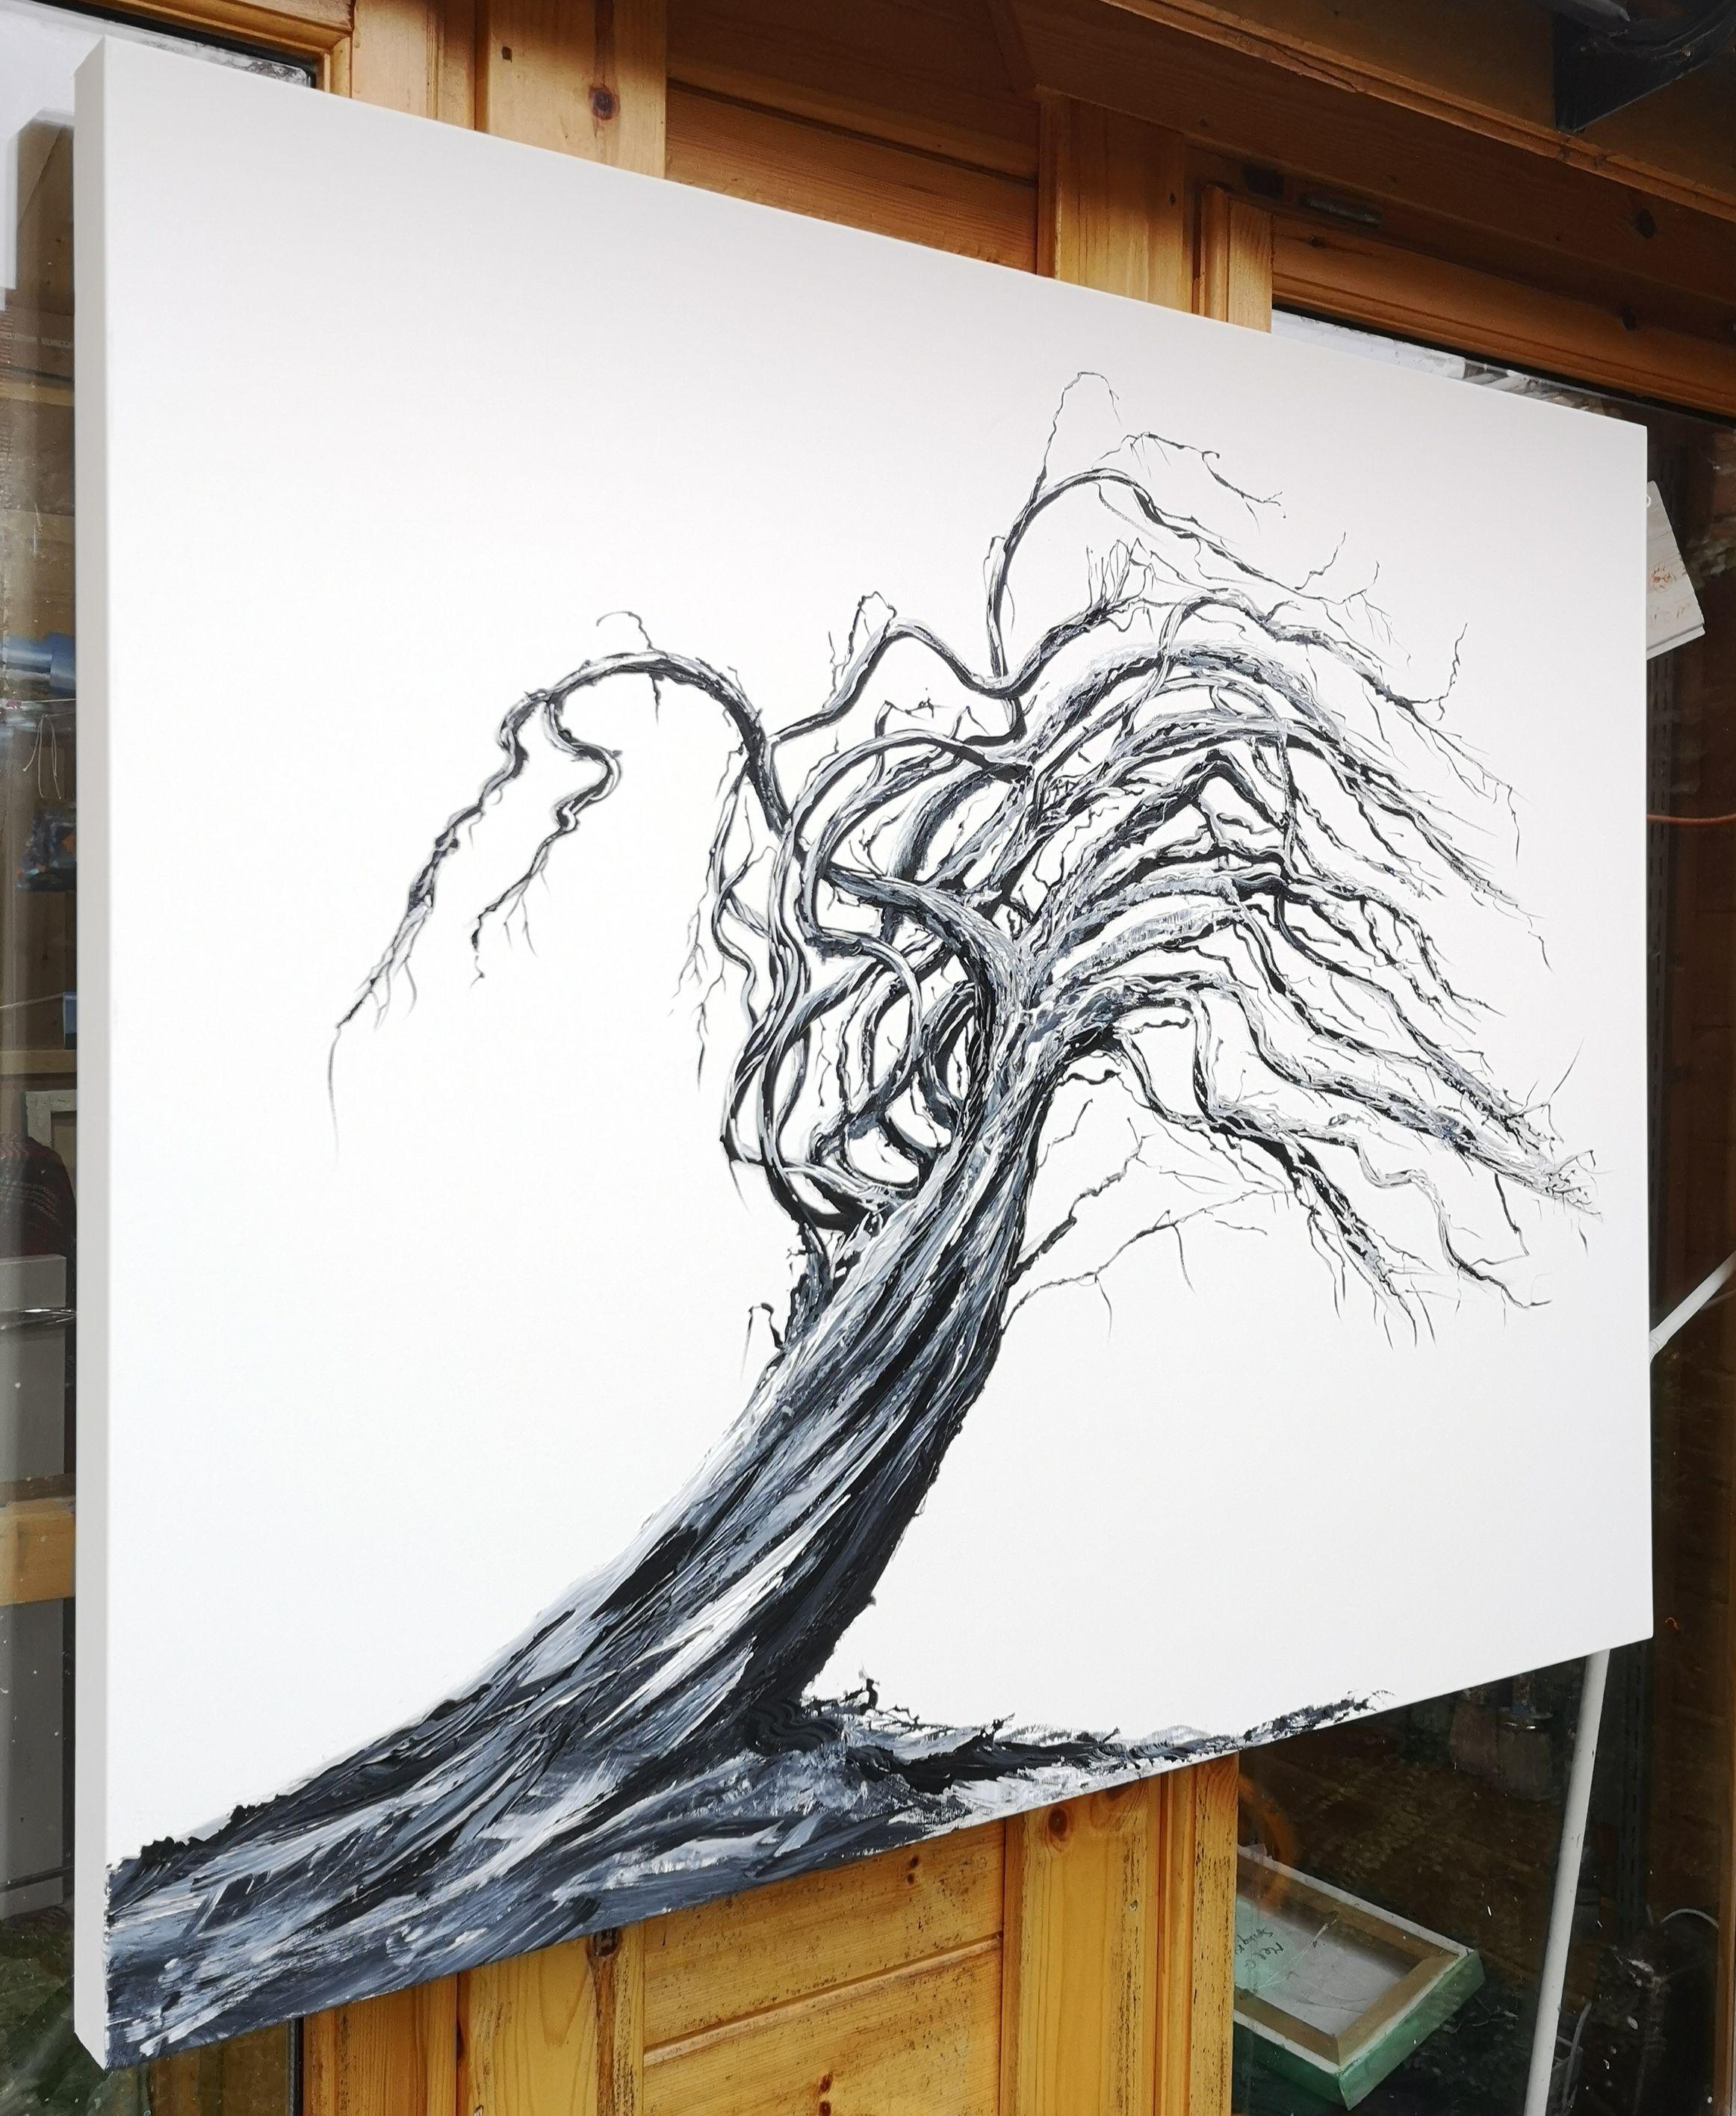 This piece is pure emotion on canvas.    Trees... breath life and soul into the earth. I never tire of staring and examining them, the way their branches weave through time, the stories they reflect of the elements they withstand. For me, painting a